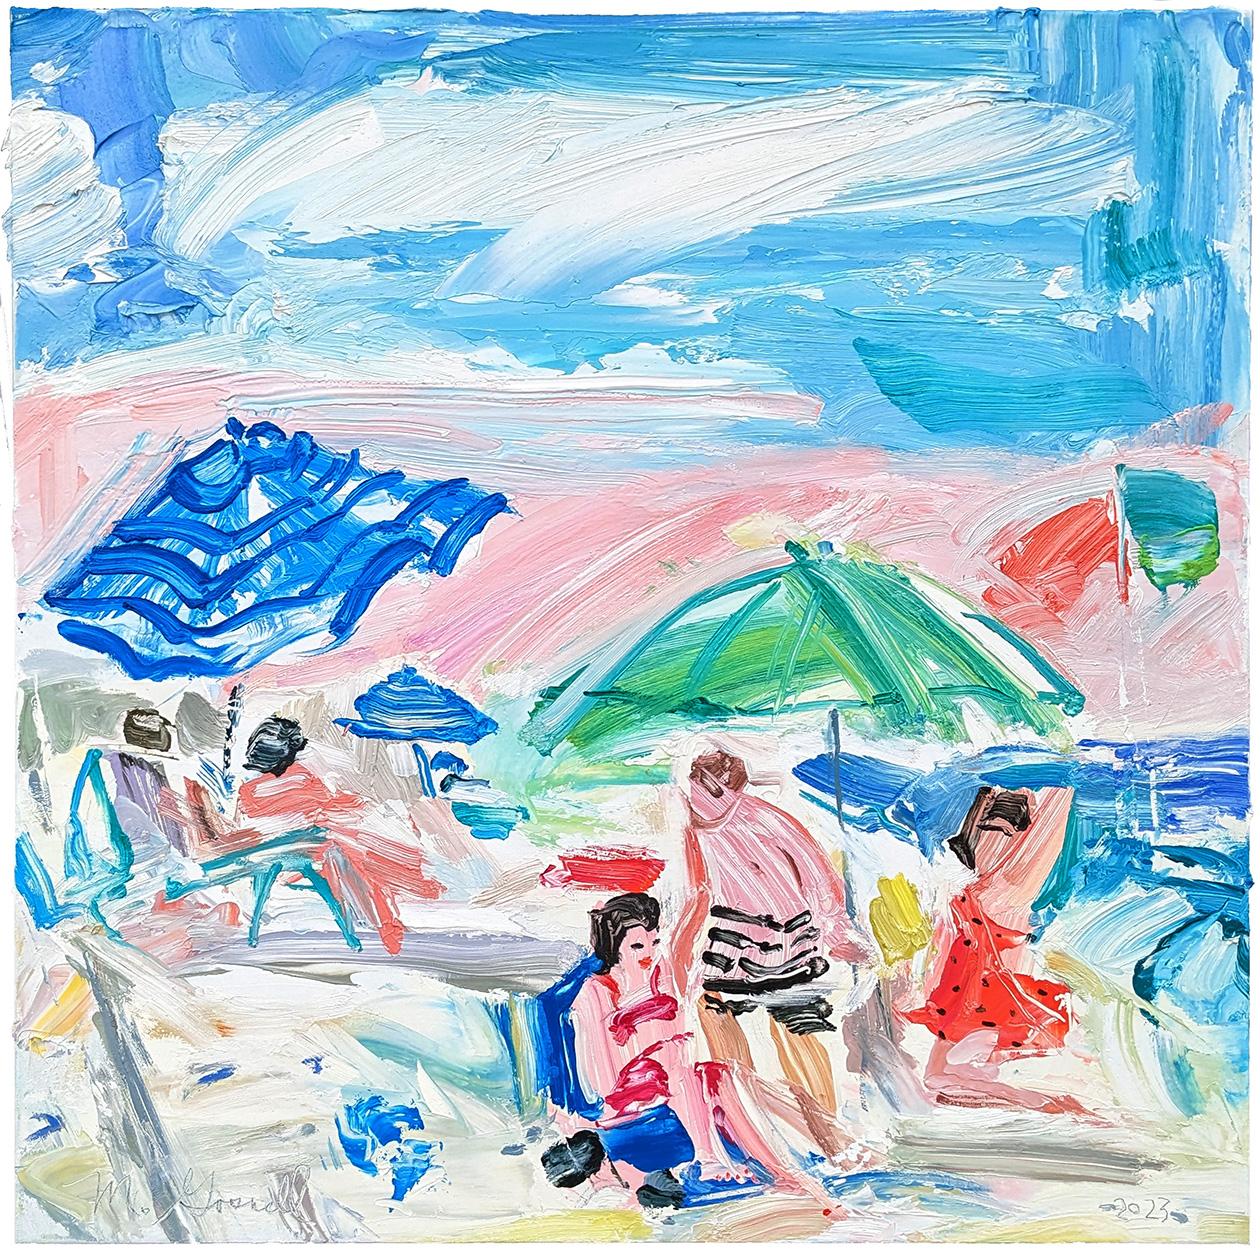 Bathers - Painting by Margery Gosnell-Qua